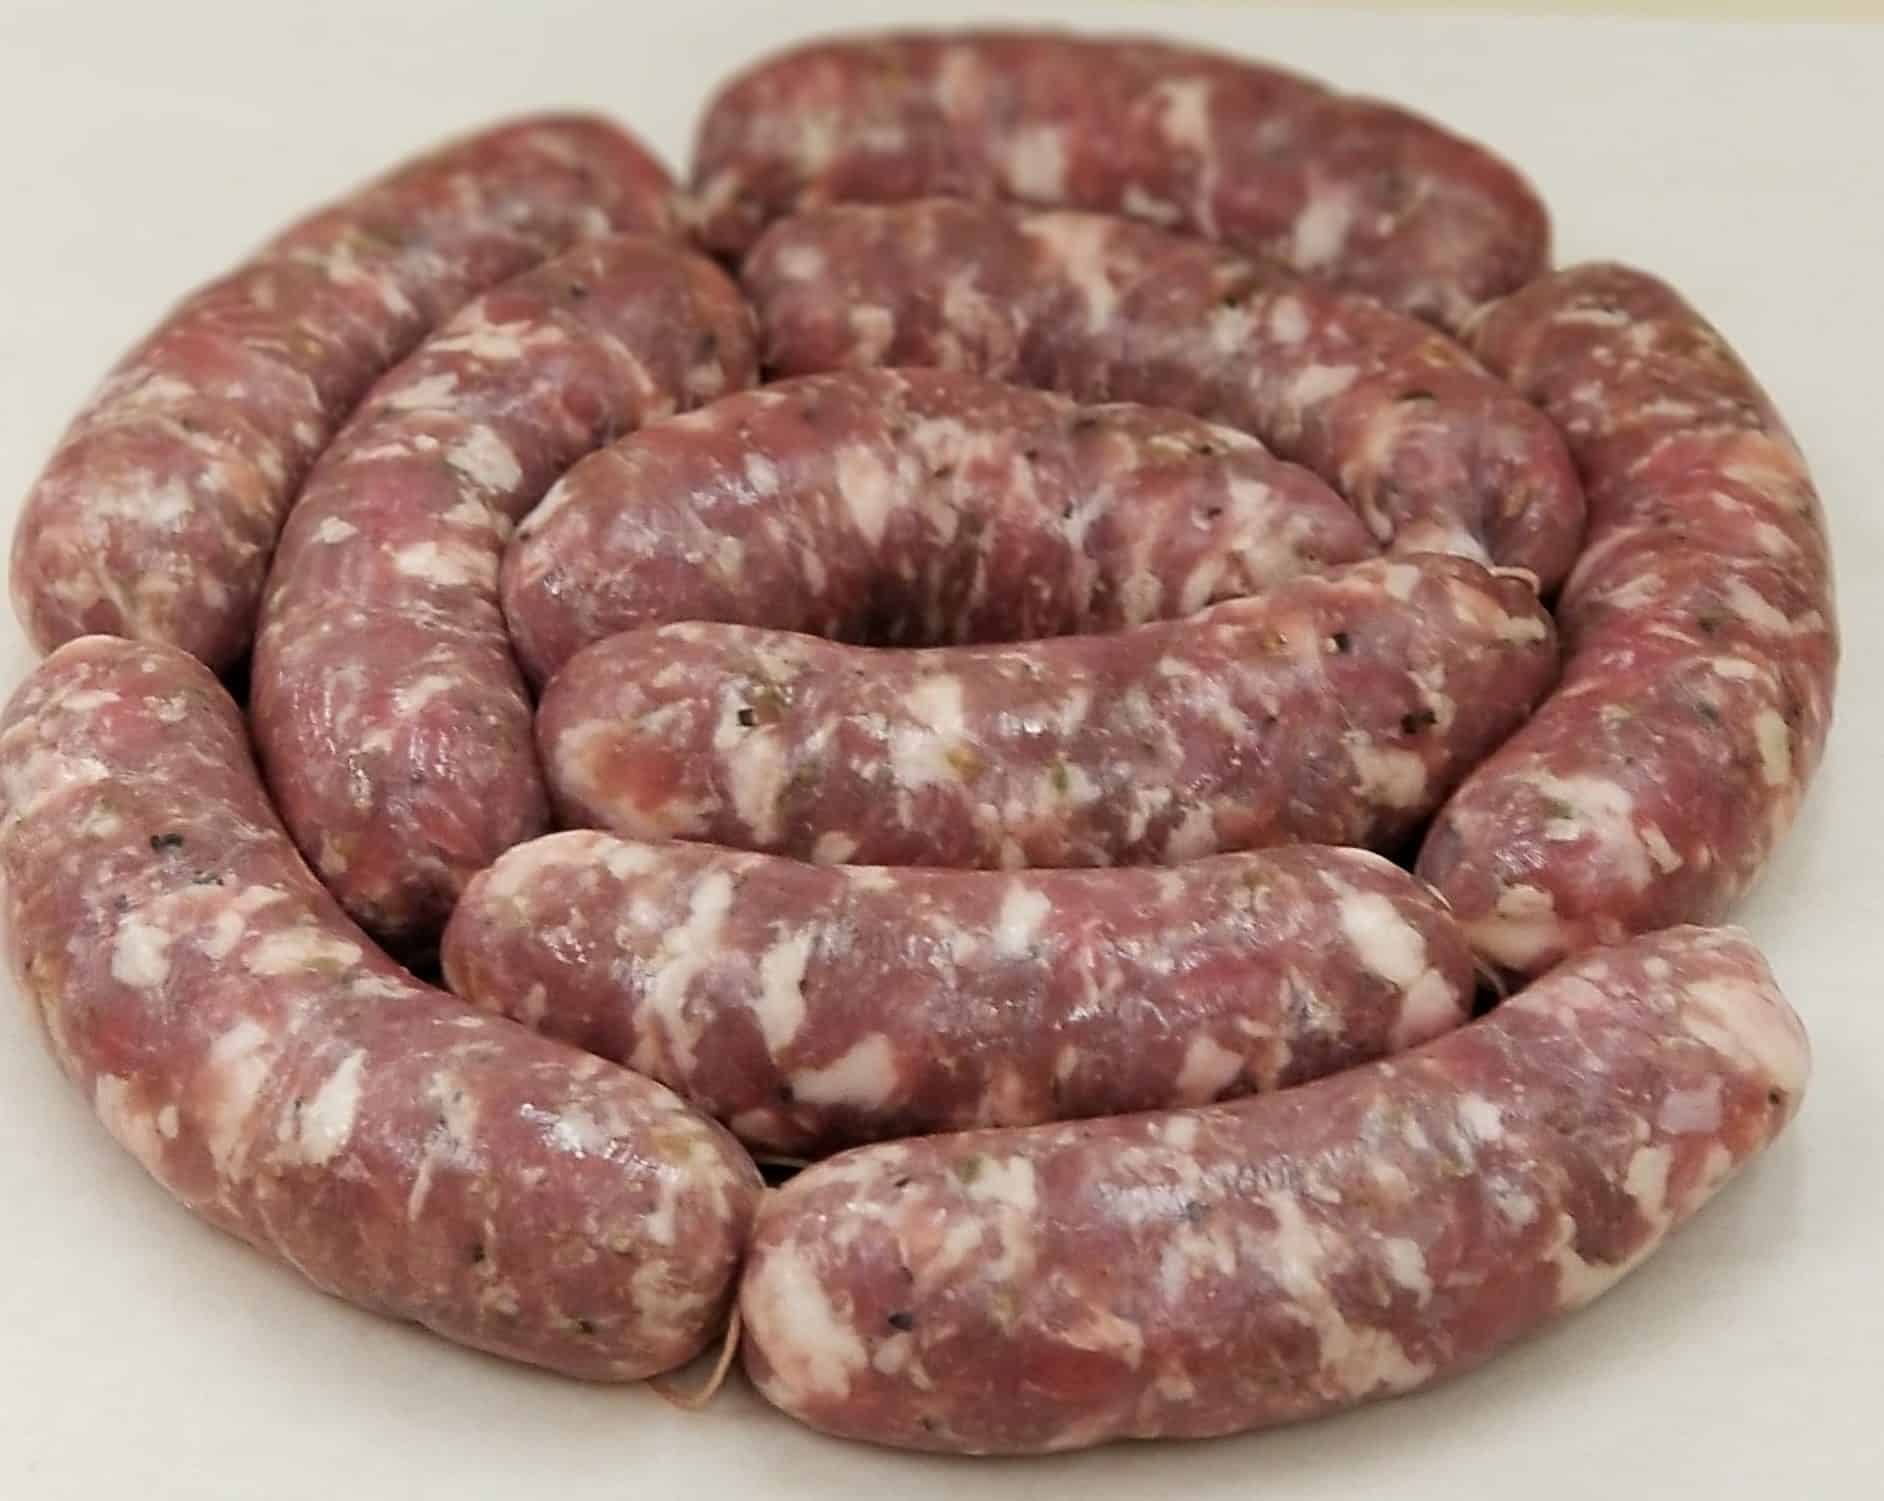 Vincent's Sweet Sausage - Thick 1lb Pack/4 Links